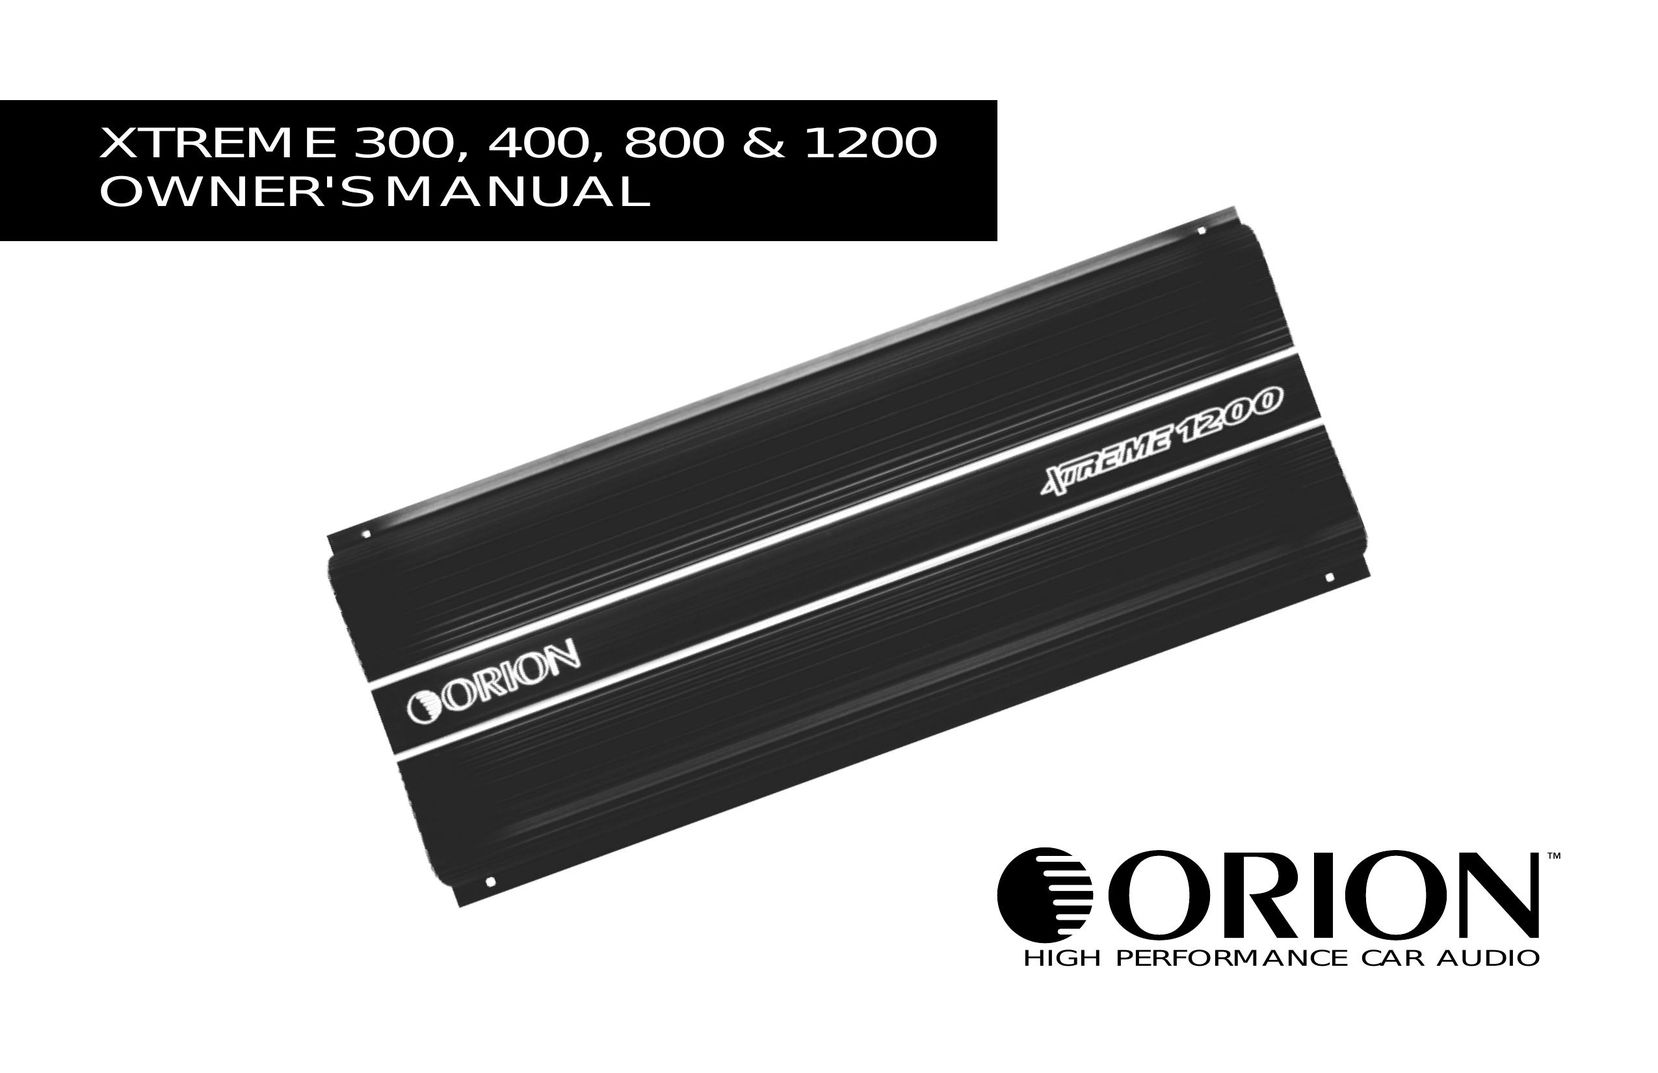 Orion Car Audio XTREME 300 Car Stereo System User Manual